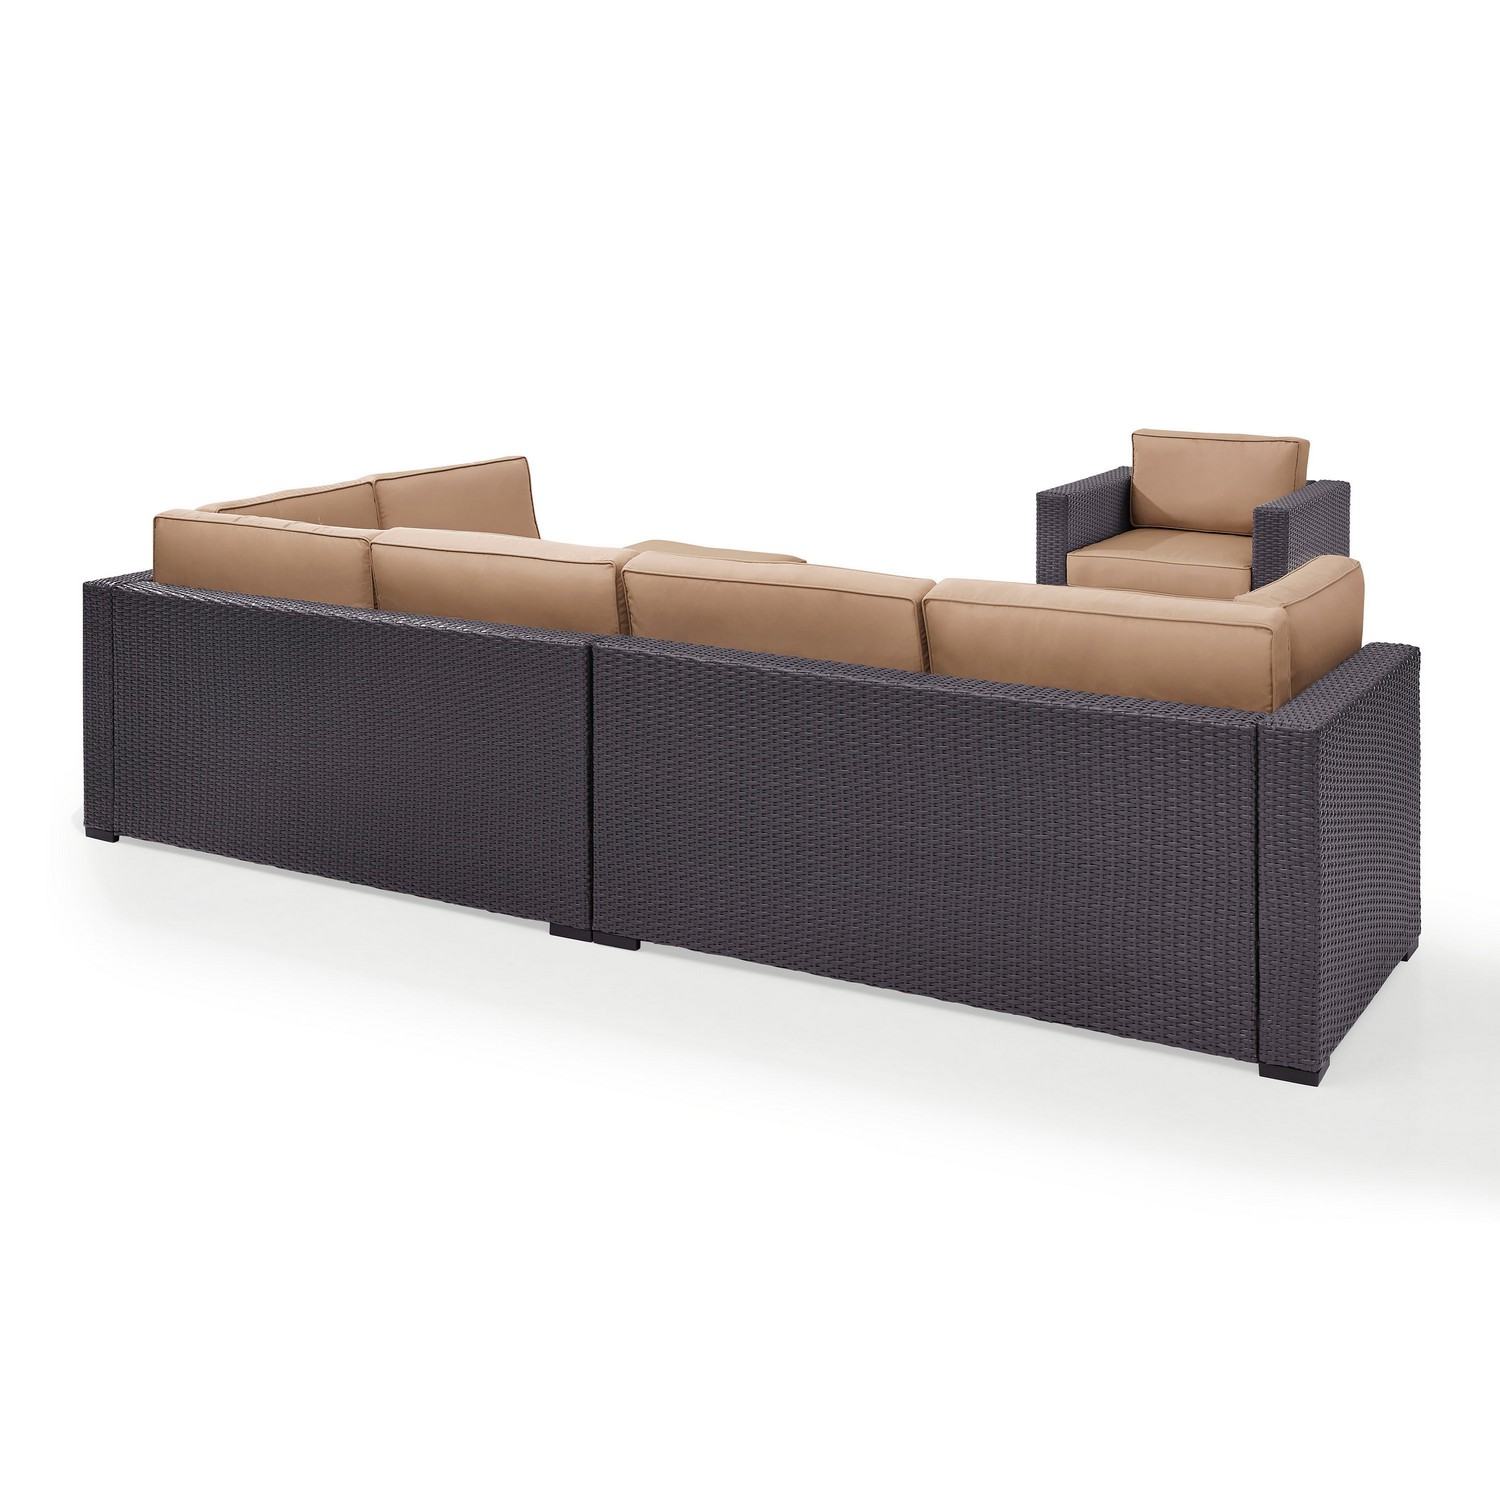 Crosley Biscayne 6-PC Outdoor Wicker Sectional Set - 2 Loveseats, Armless Chair, Arm Chair, Coffee Table, Ottoman - Mocha/Brown